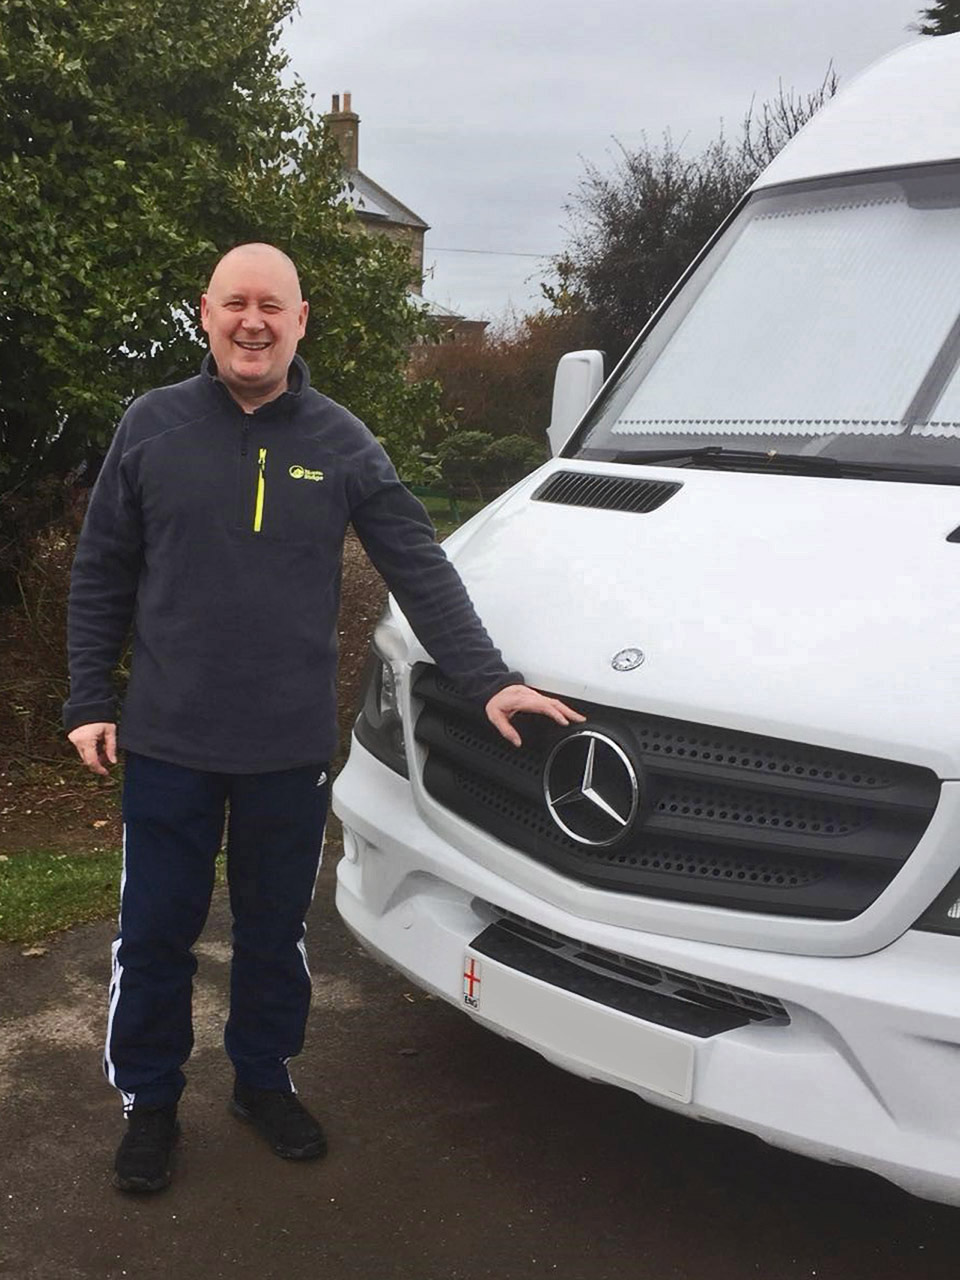 Steve with his Mercedes Sprinter